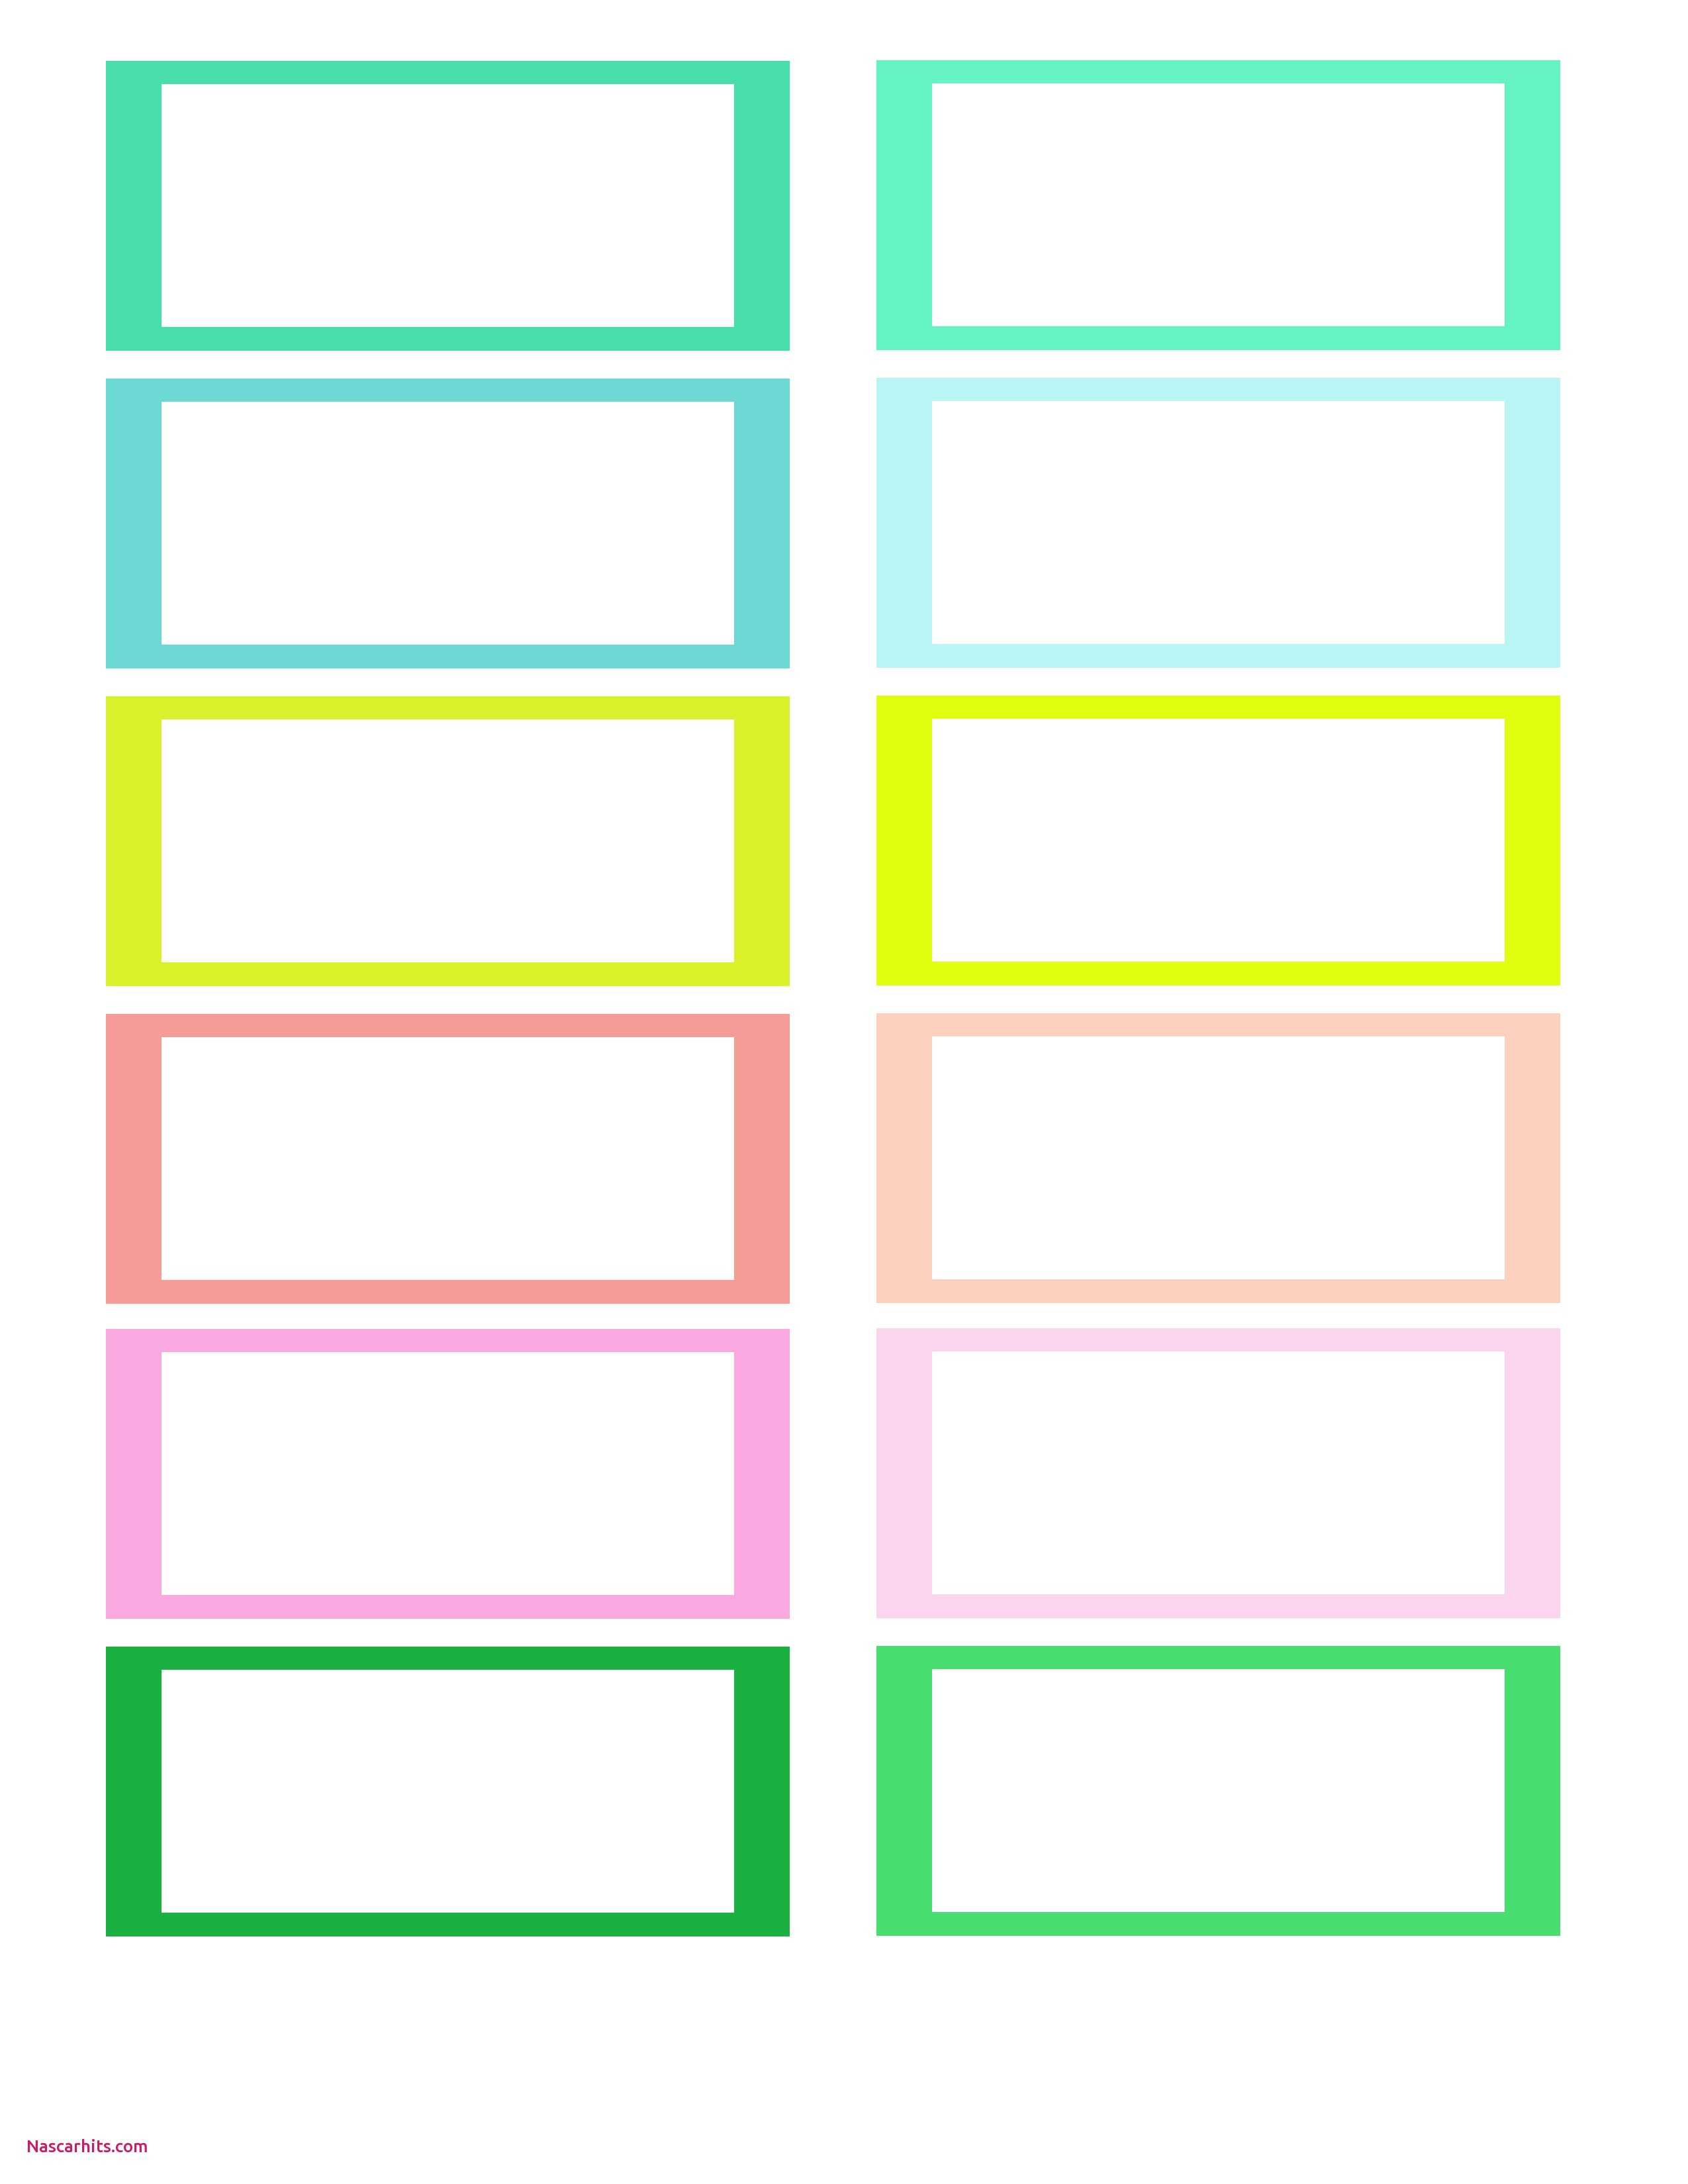 File Cabinet Drawer Label Template